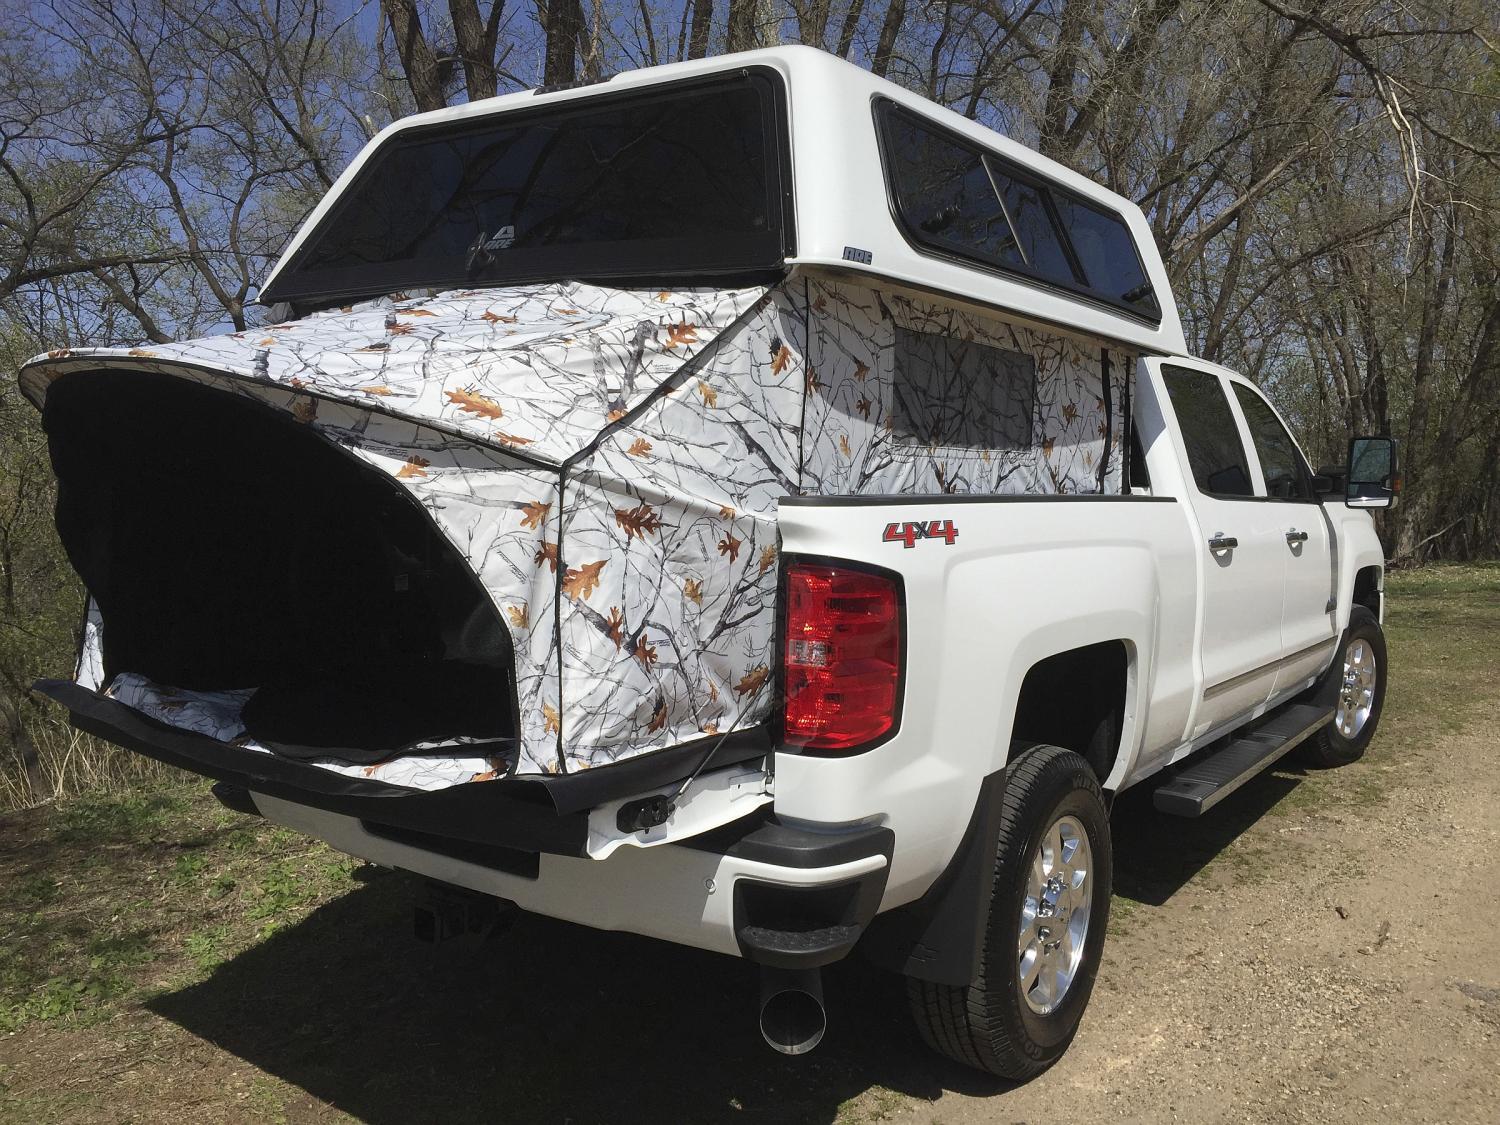 Camping in your truck made easy with power cap lift - The ...